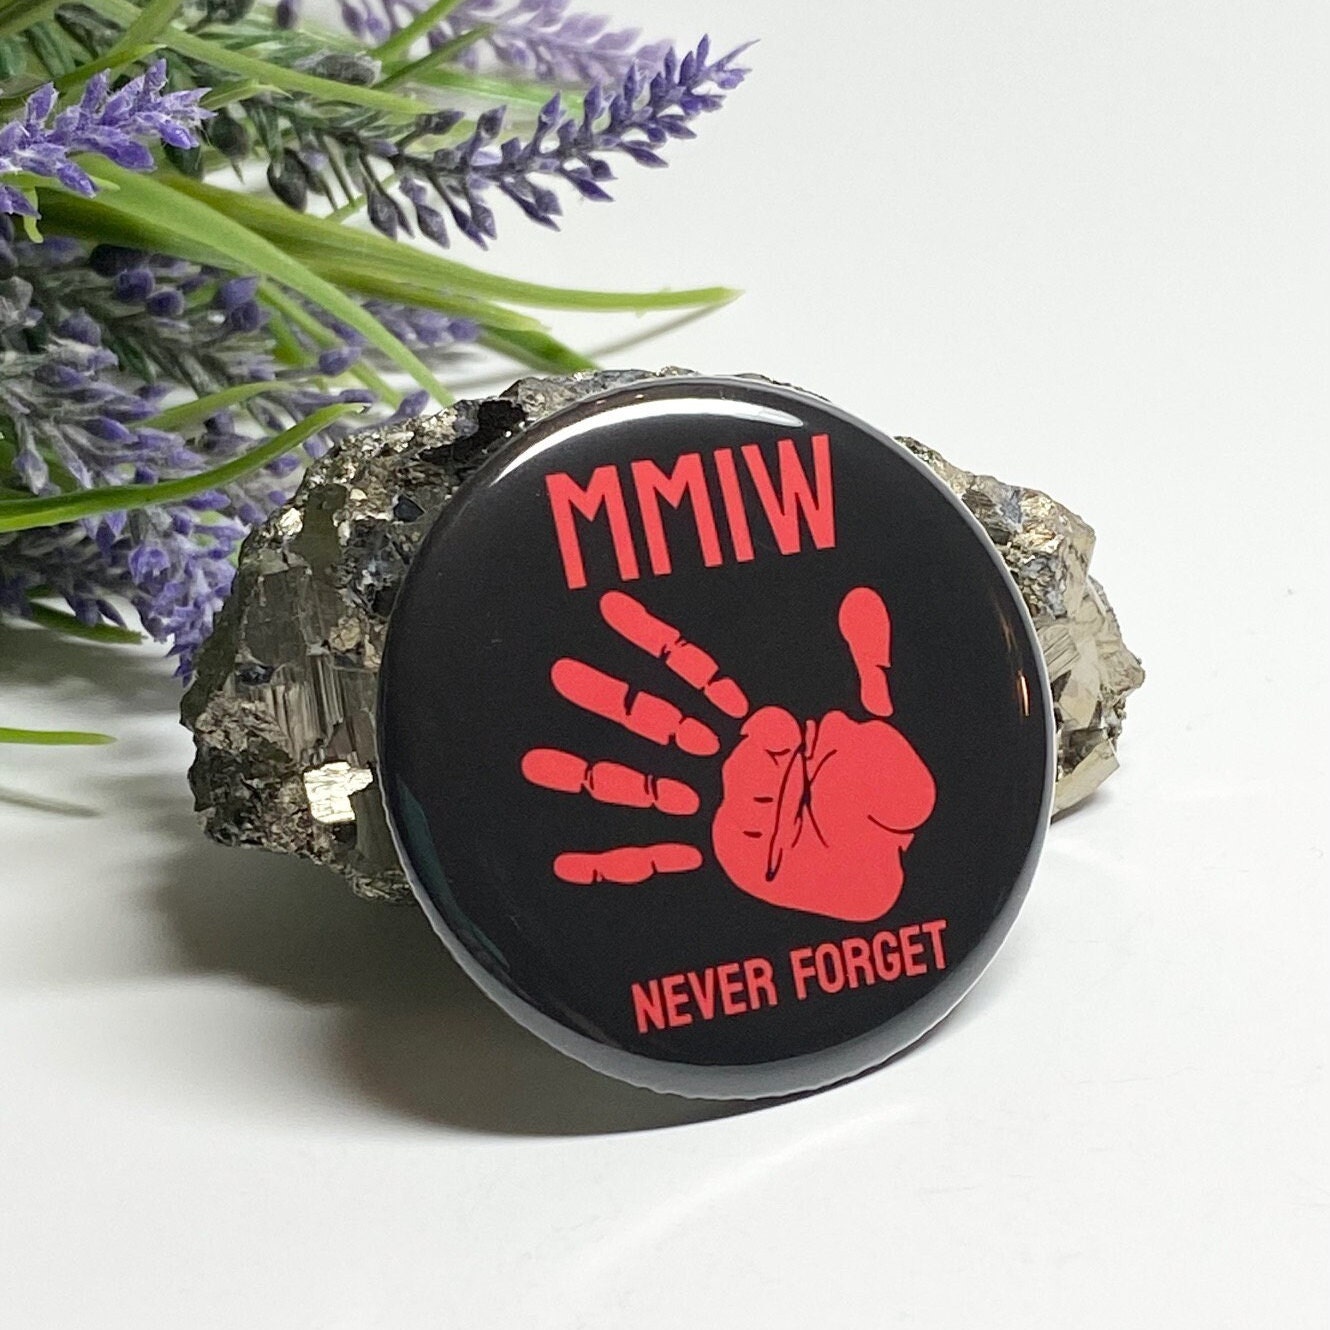 MMIW Ribbon - Width 1 1/2 inches - Sold by the Yard (36 inches) –  Indigenous Gifts